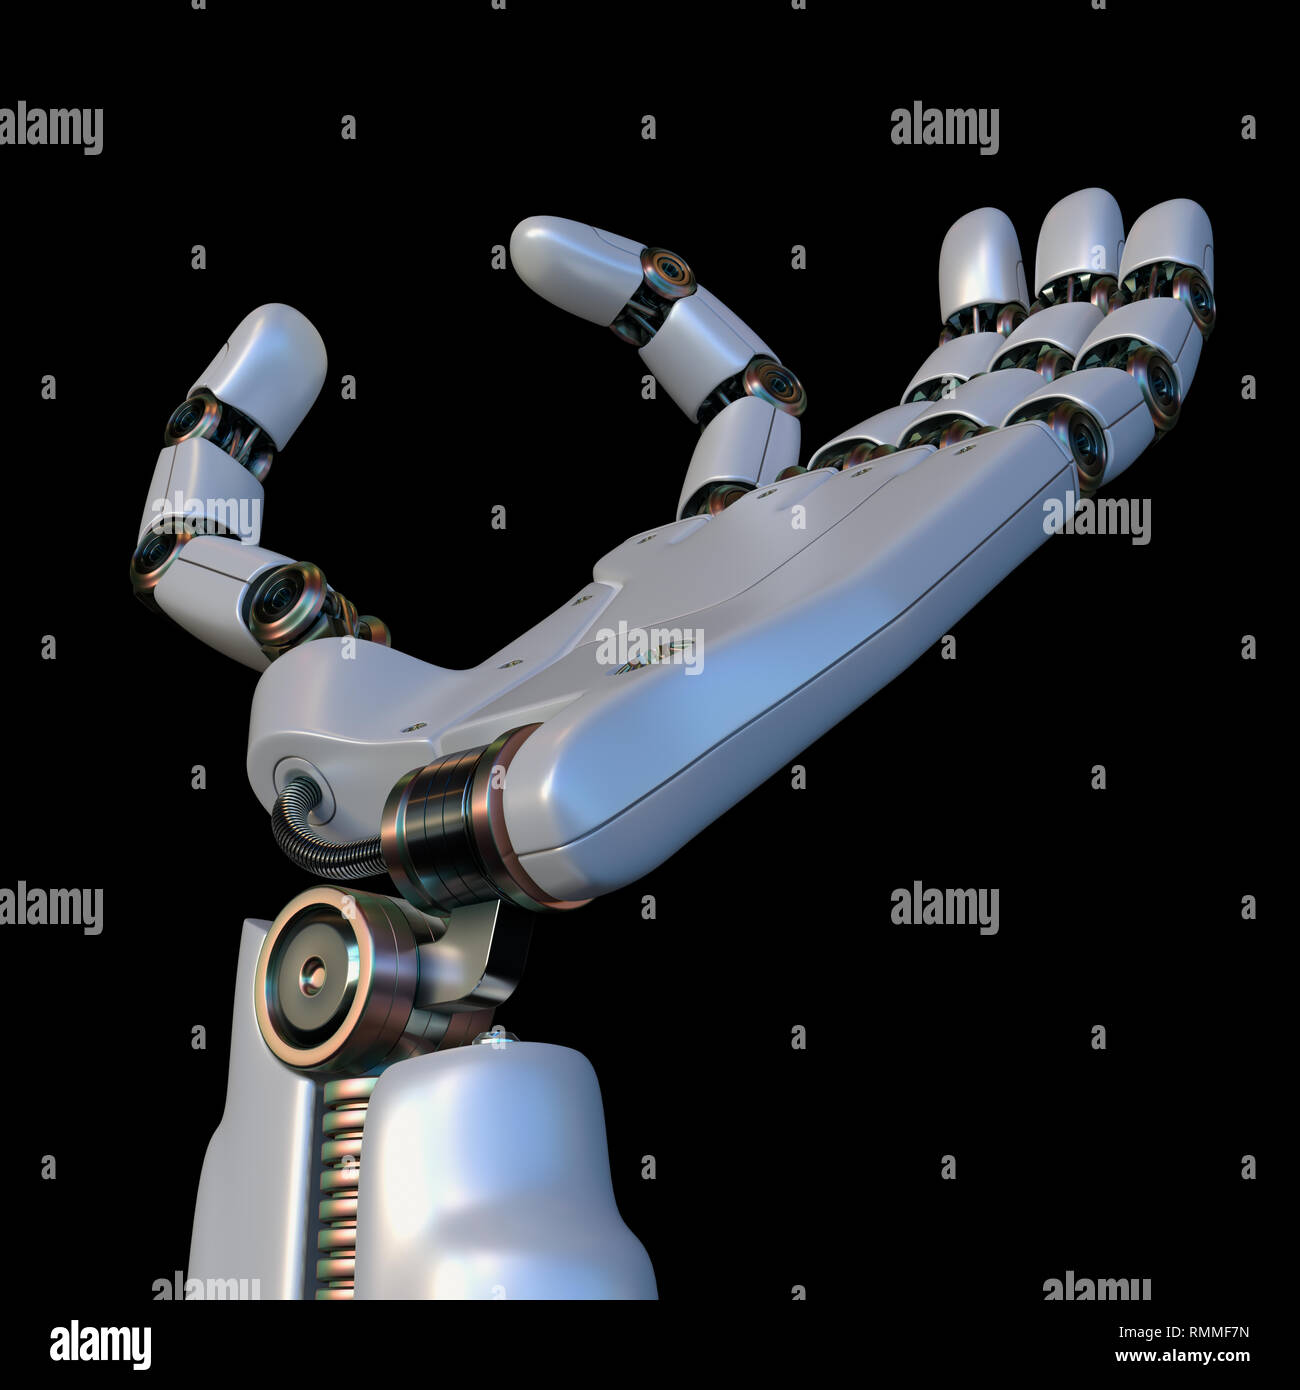 Robotic hand on black background. Your text or image between the robot's fingers. Stock Photo